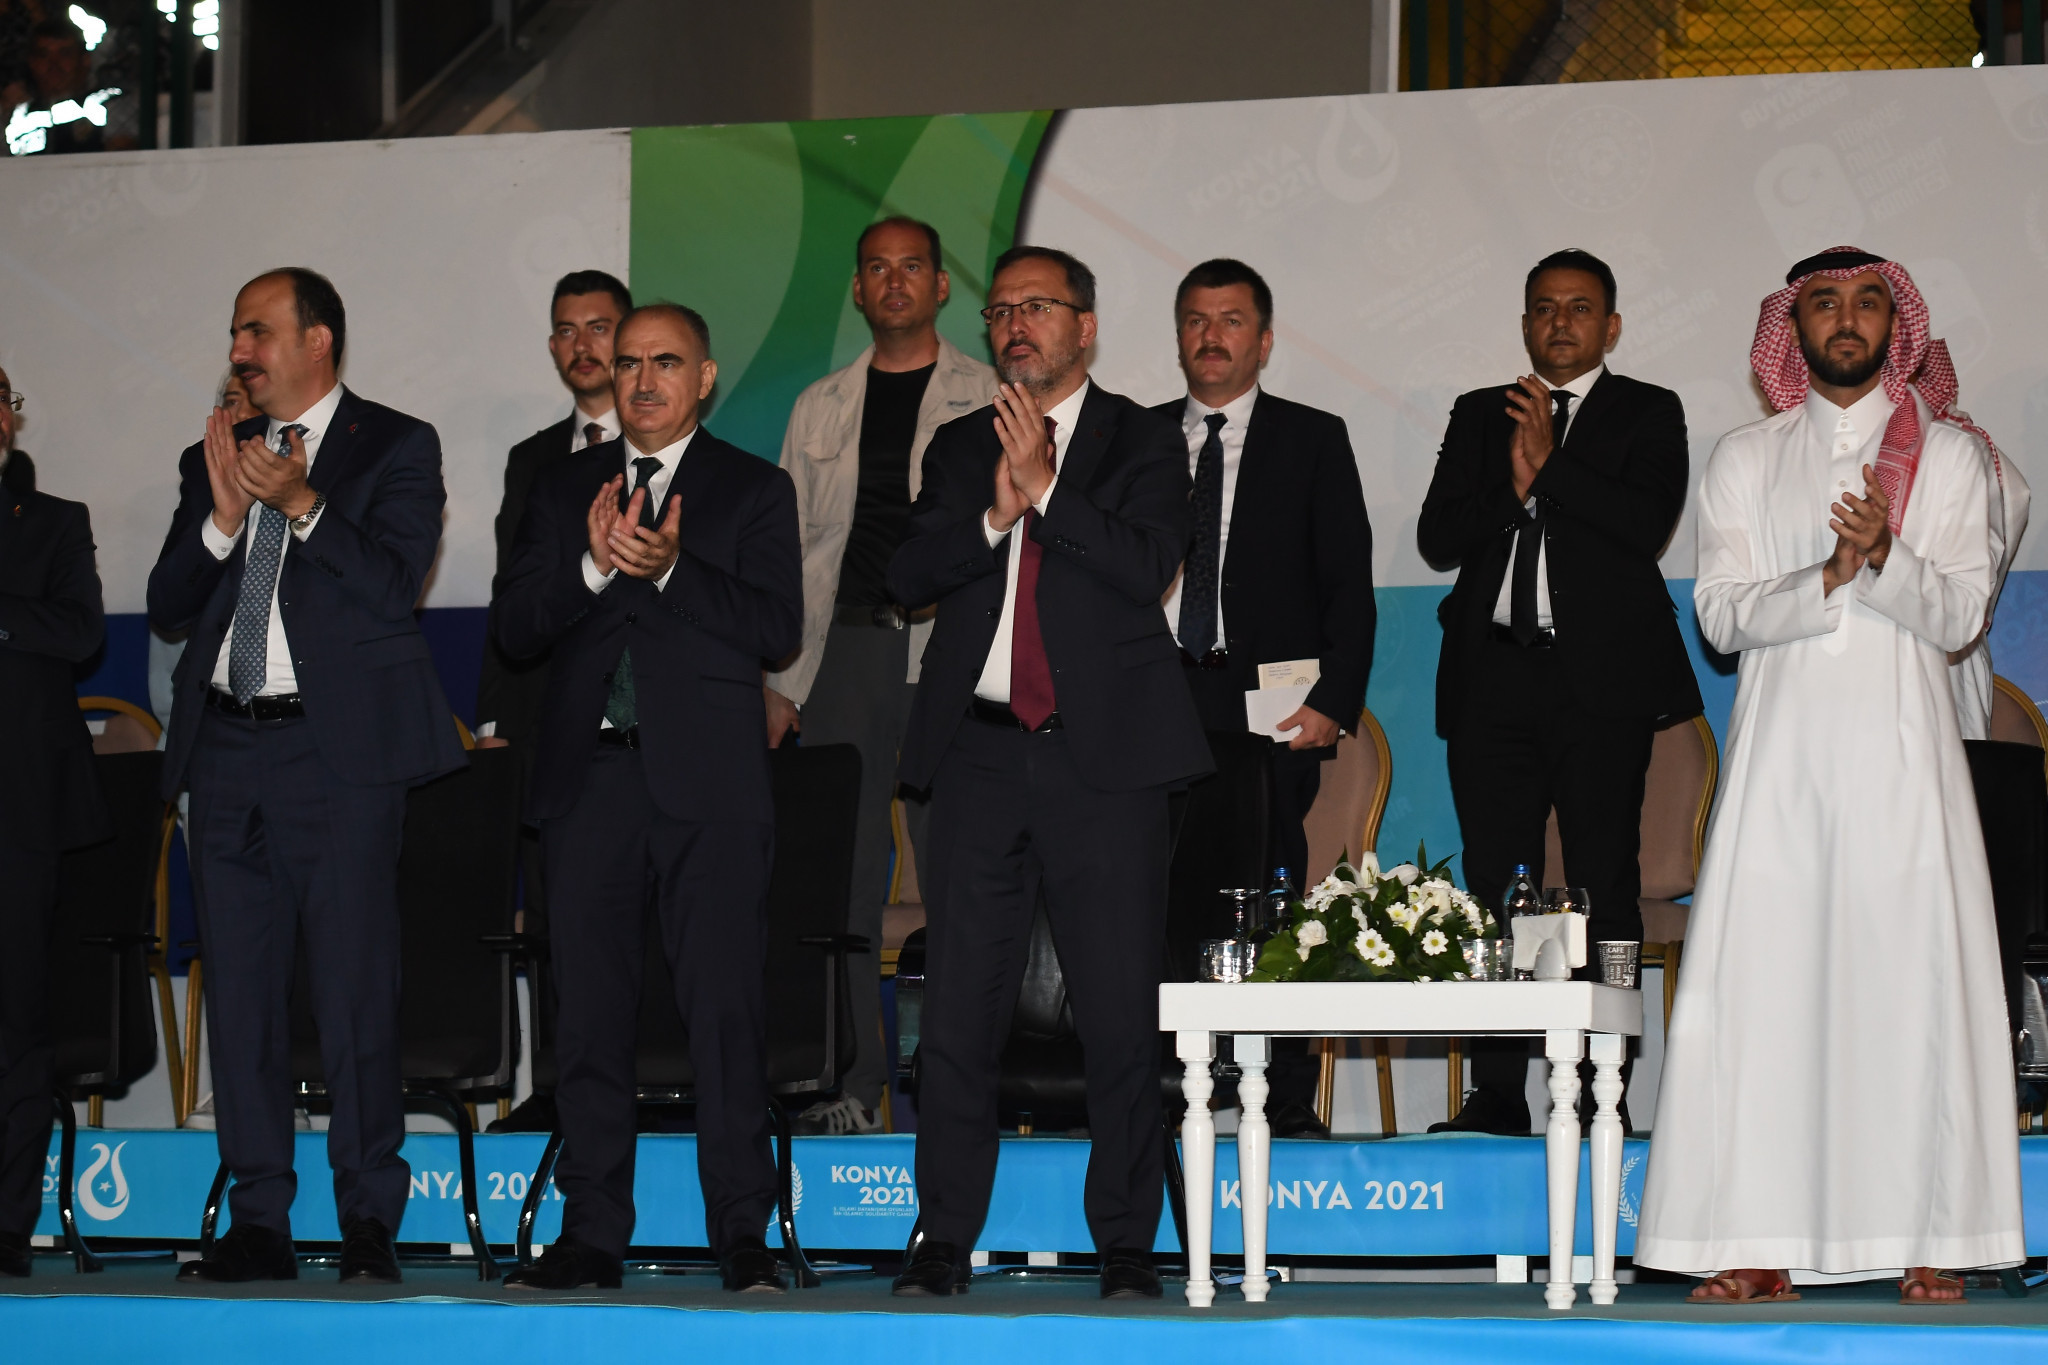 A number of dignitaries attended the Closing Ceremony of the Konya 2021 Islamic Solidarity Games ©Konya 2021